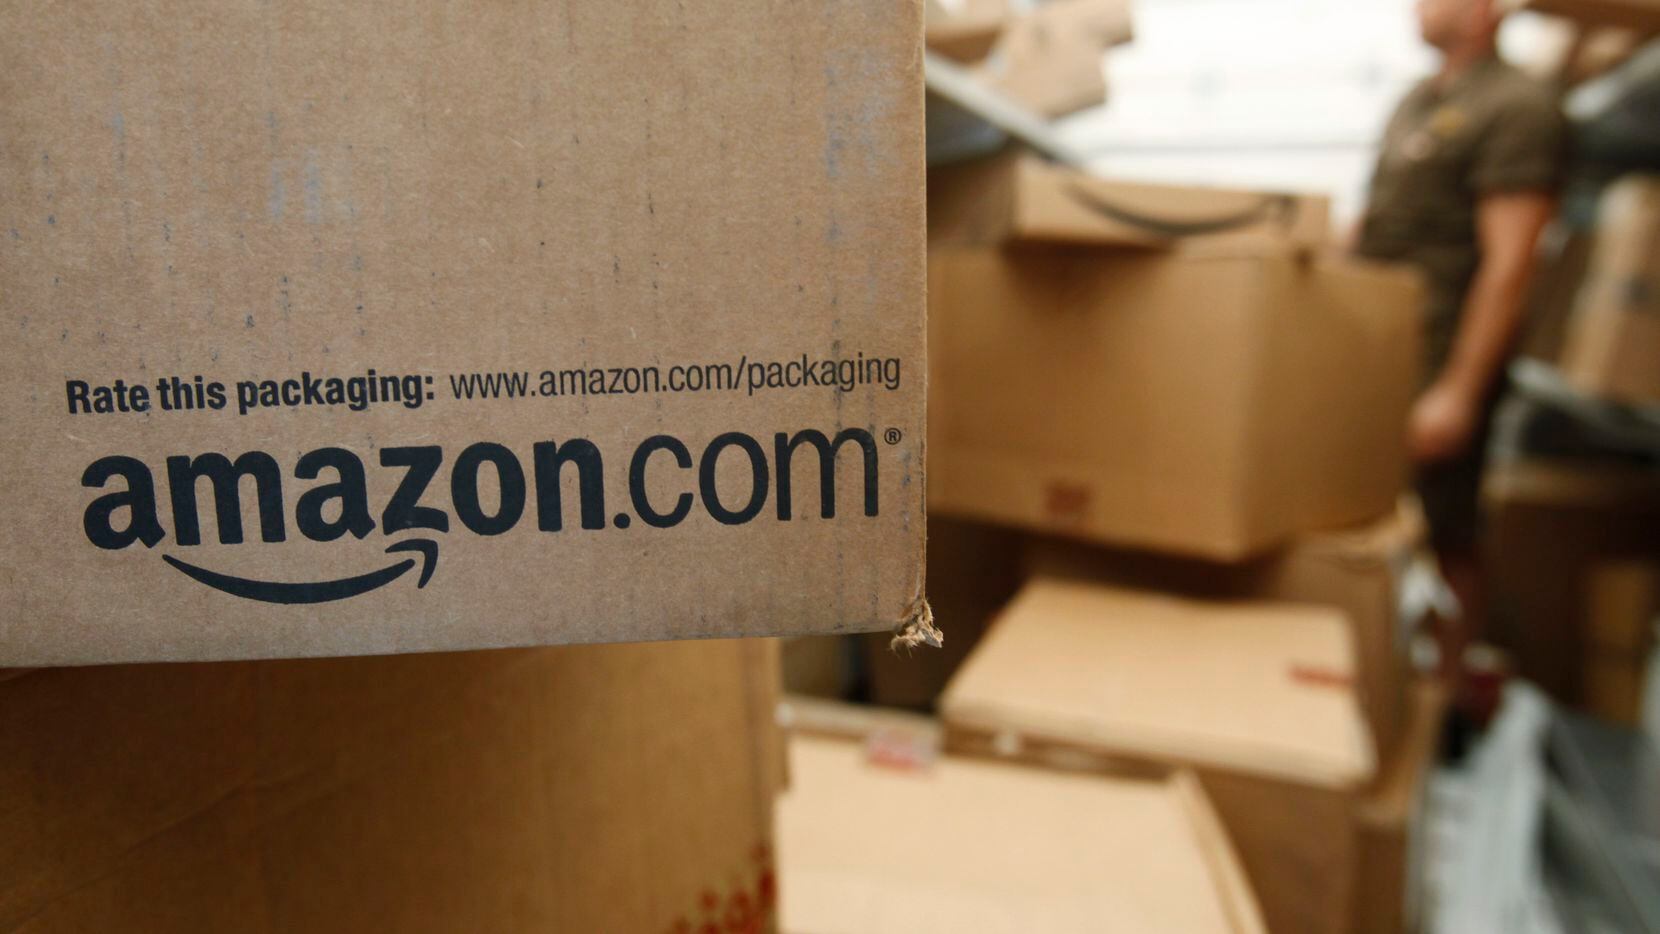 Amazon is giving Prime members a new way to order same-day deliveries.